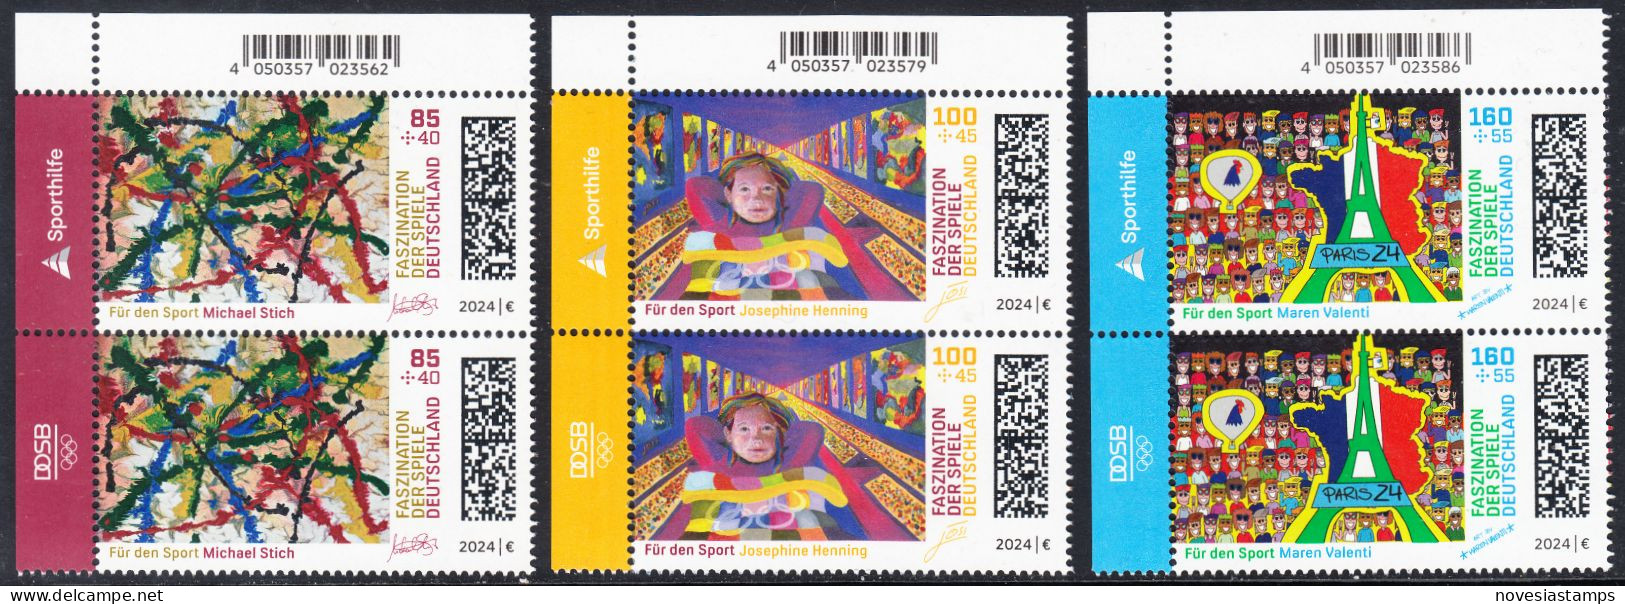 !a! GERMANY 2024 Mi. 3825-3827 MNH SET Of 3 Vert.PAIRS From Upper Left Corners - Olympic Games 2024, Paris - Ungebraucht